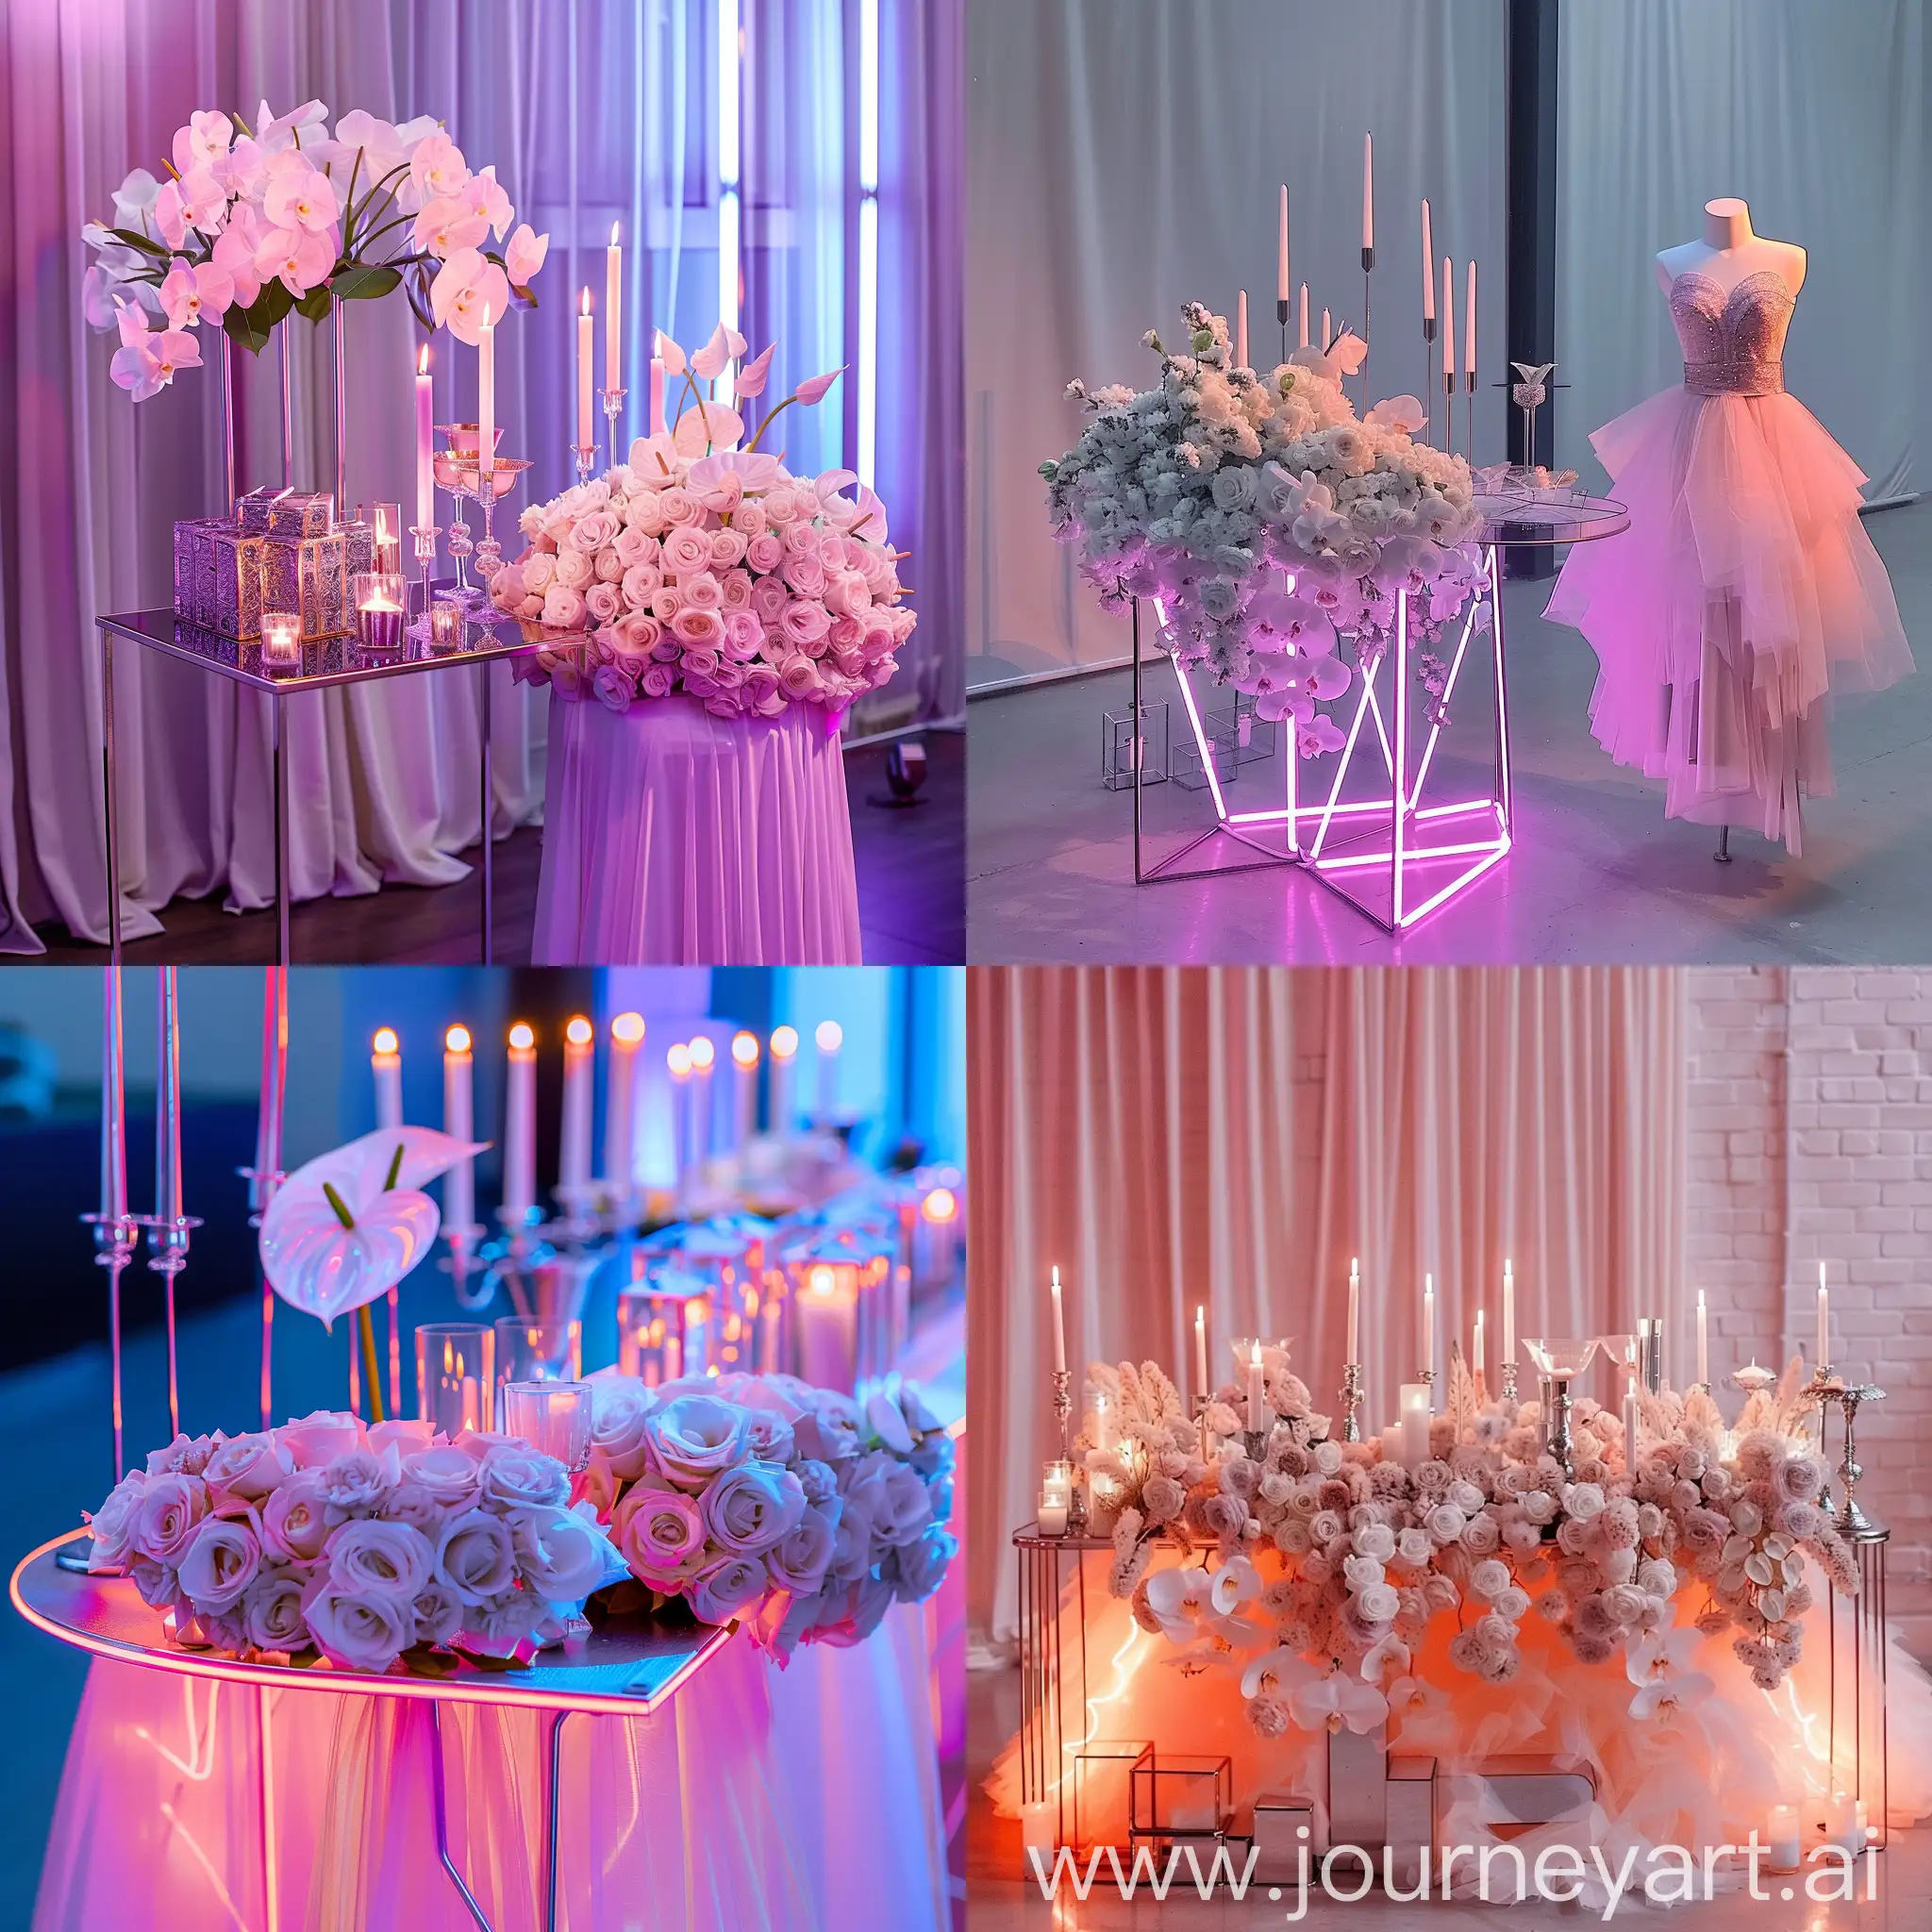 Elegant-Neon-Wedding-Table-Decor-with-Powdery-Flowers-and-Metal-Accents